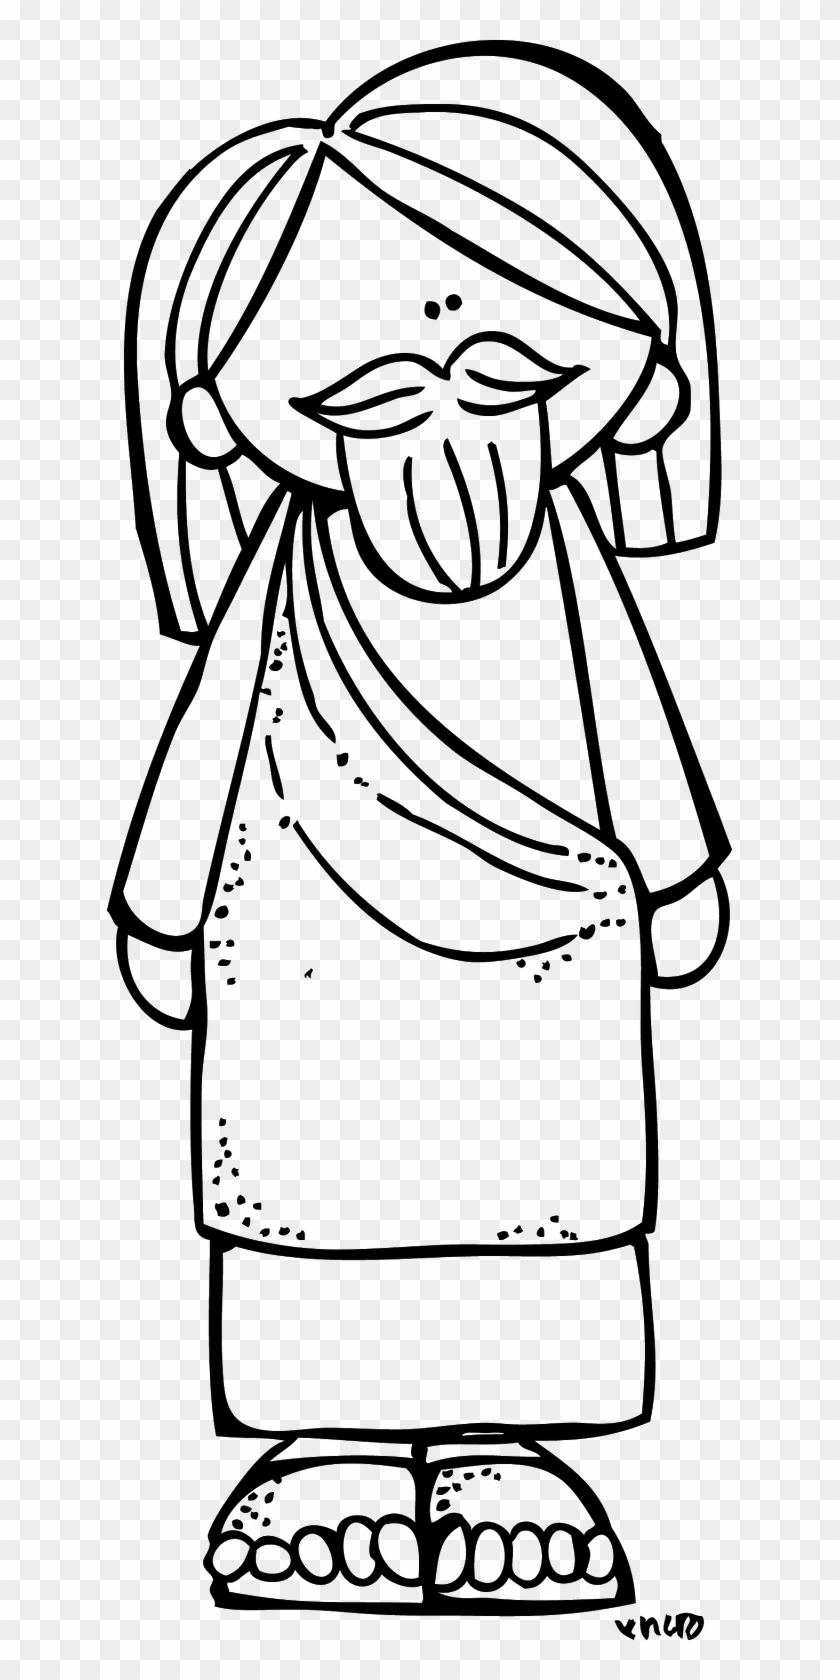 Baby Jesus Clipart Transparent Collection - Jesus Cartoon Clipart Black And White #831794